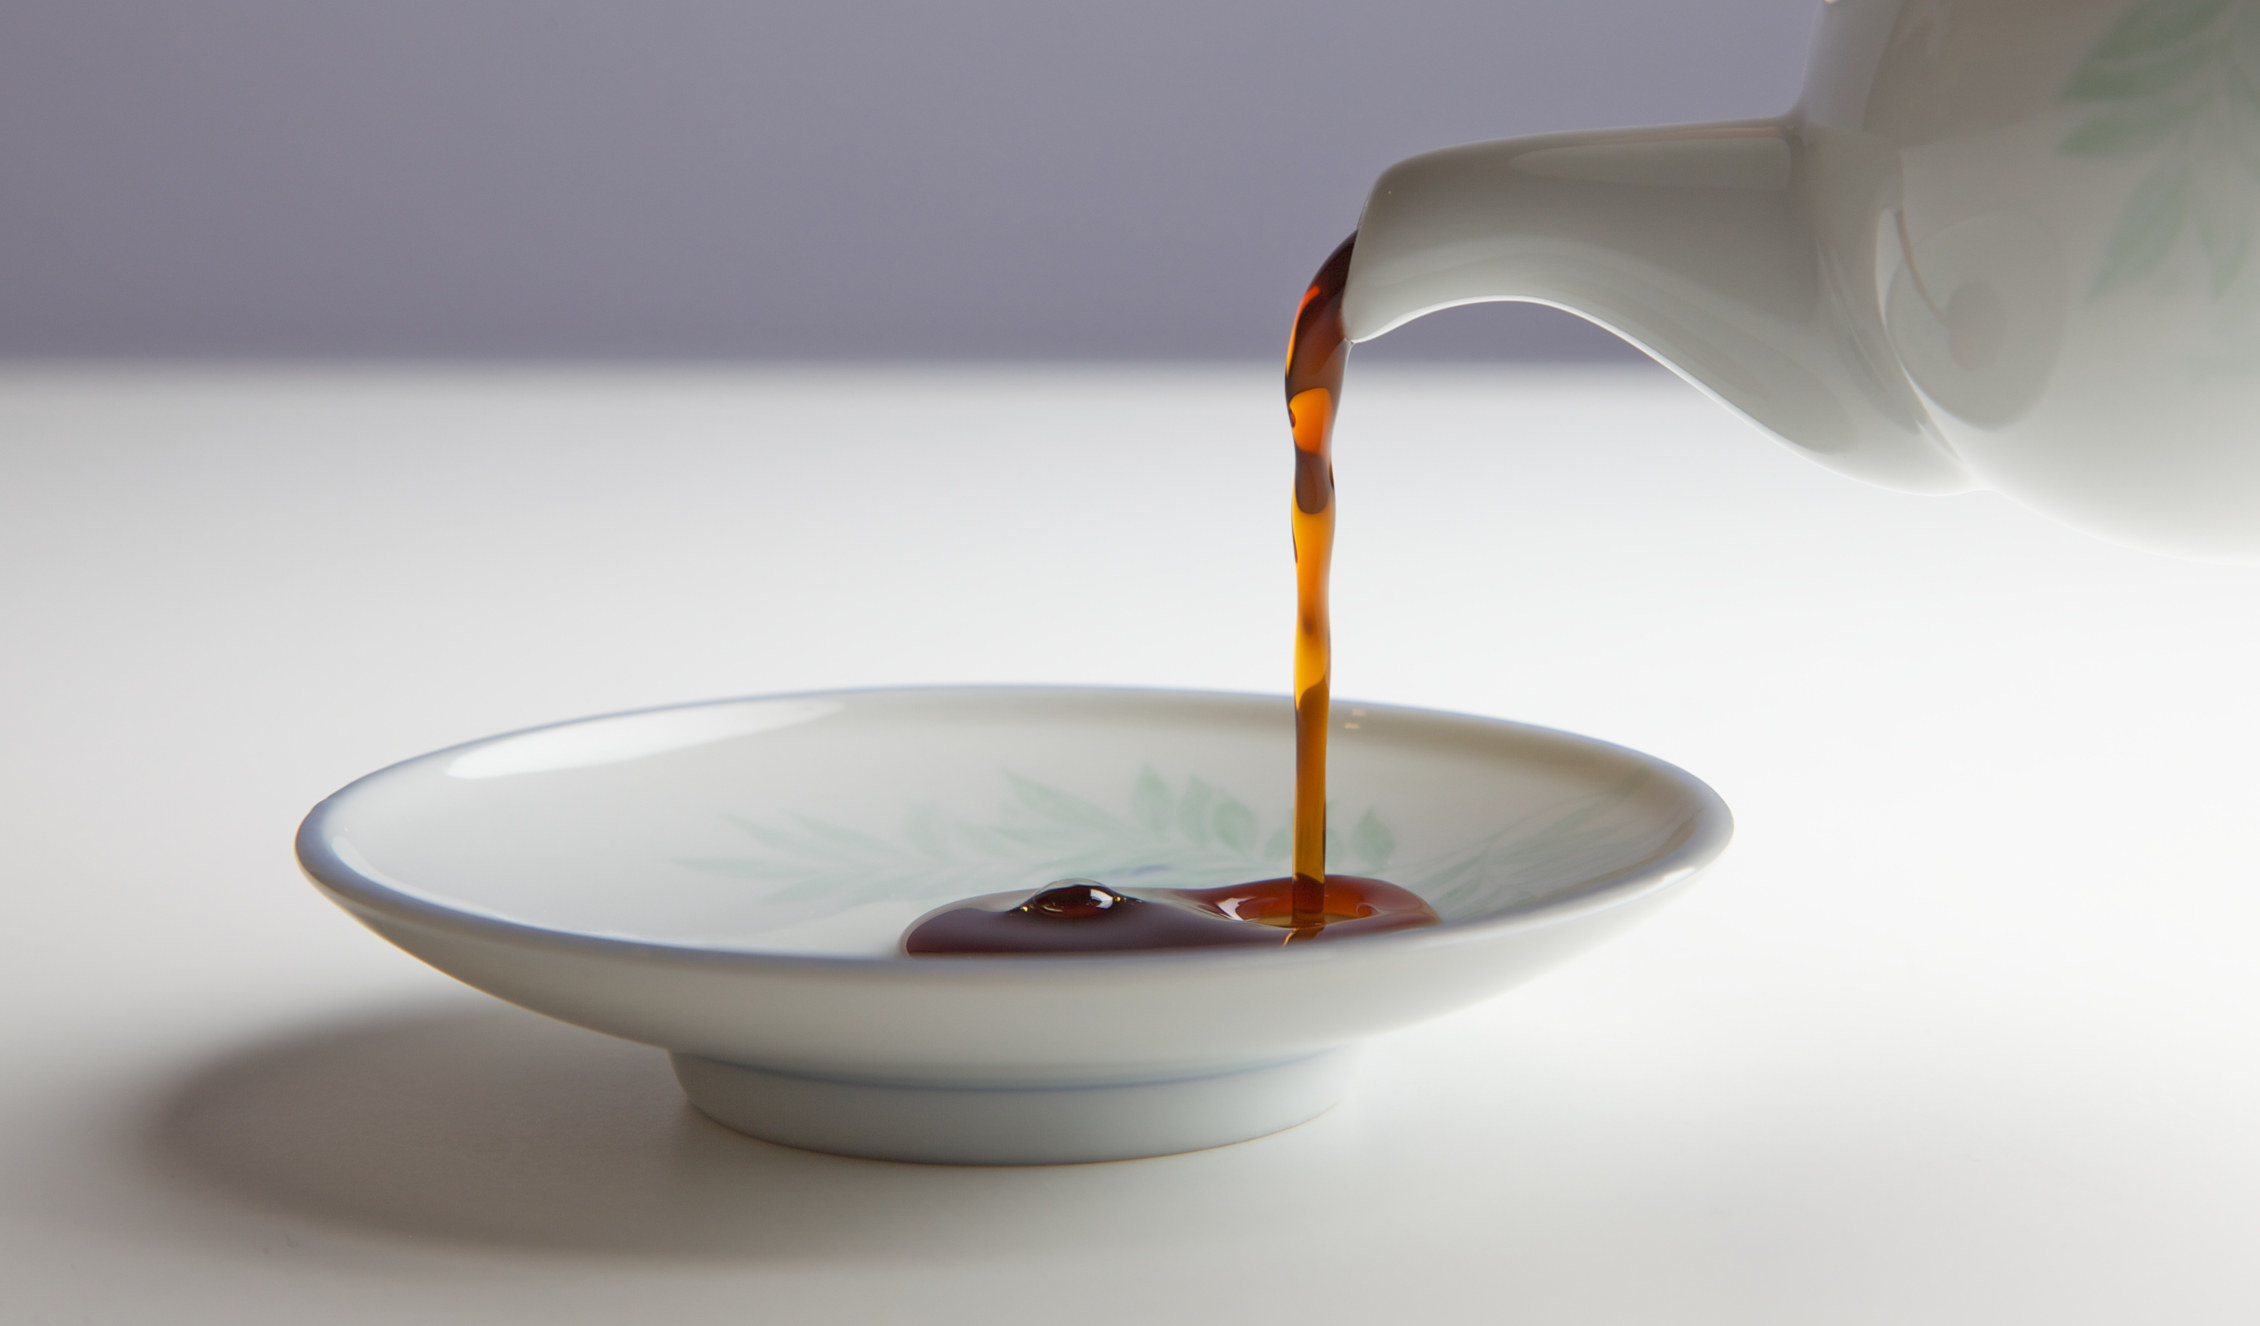 Pouring soy sauce into a bowl.